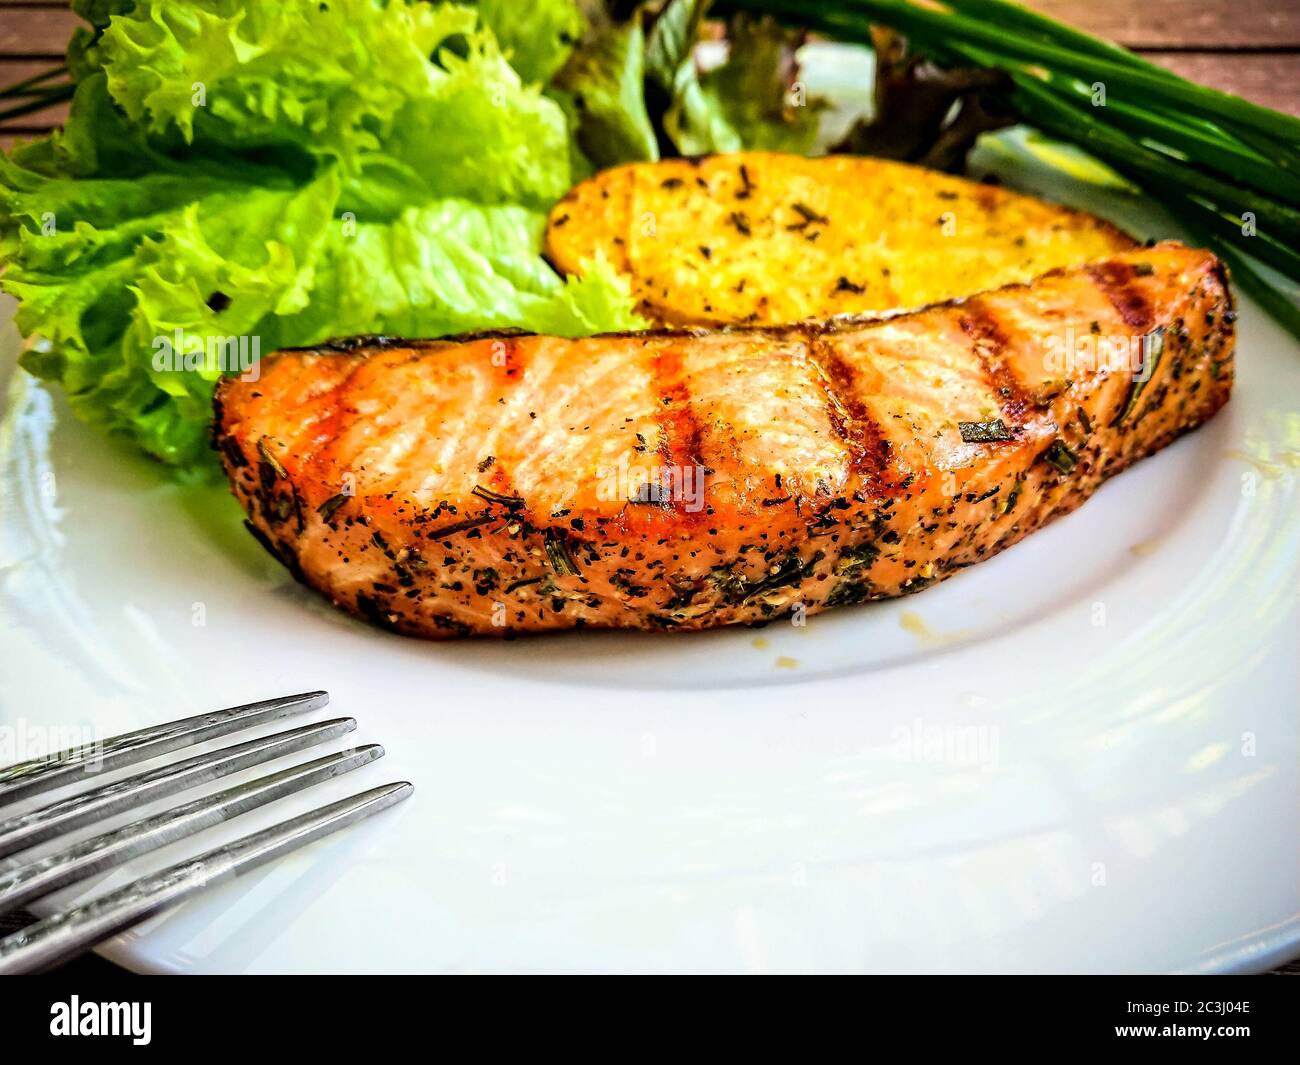 Grilled salmon fillet with potato and salad, top view Stock Photo